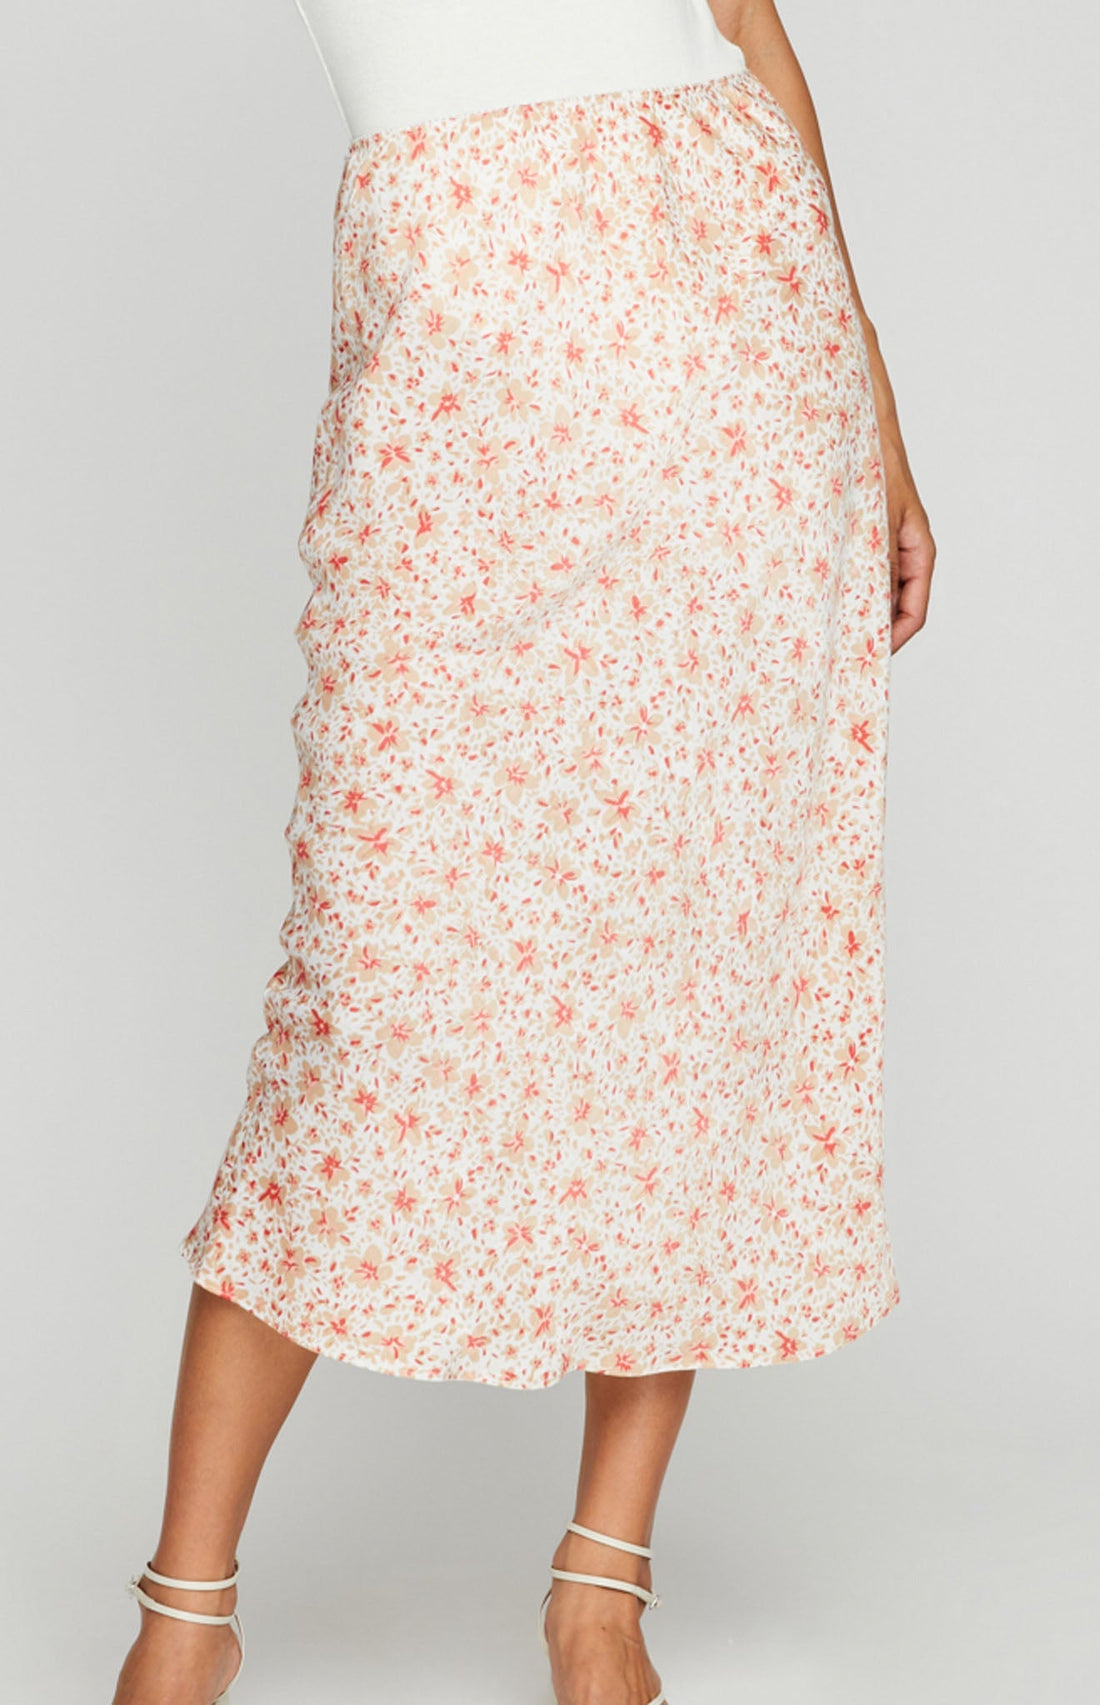 GENTLE FAWN FLORENTINE SKIRT - WHITE DITSY SKIRT GENTLE FAWN   